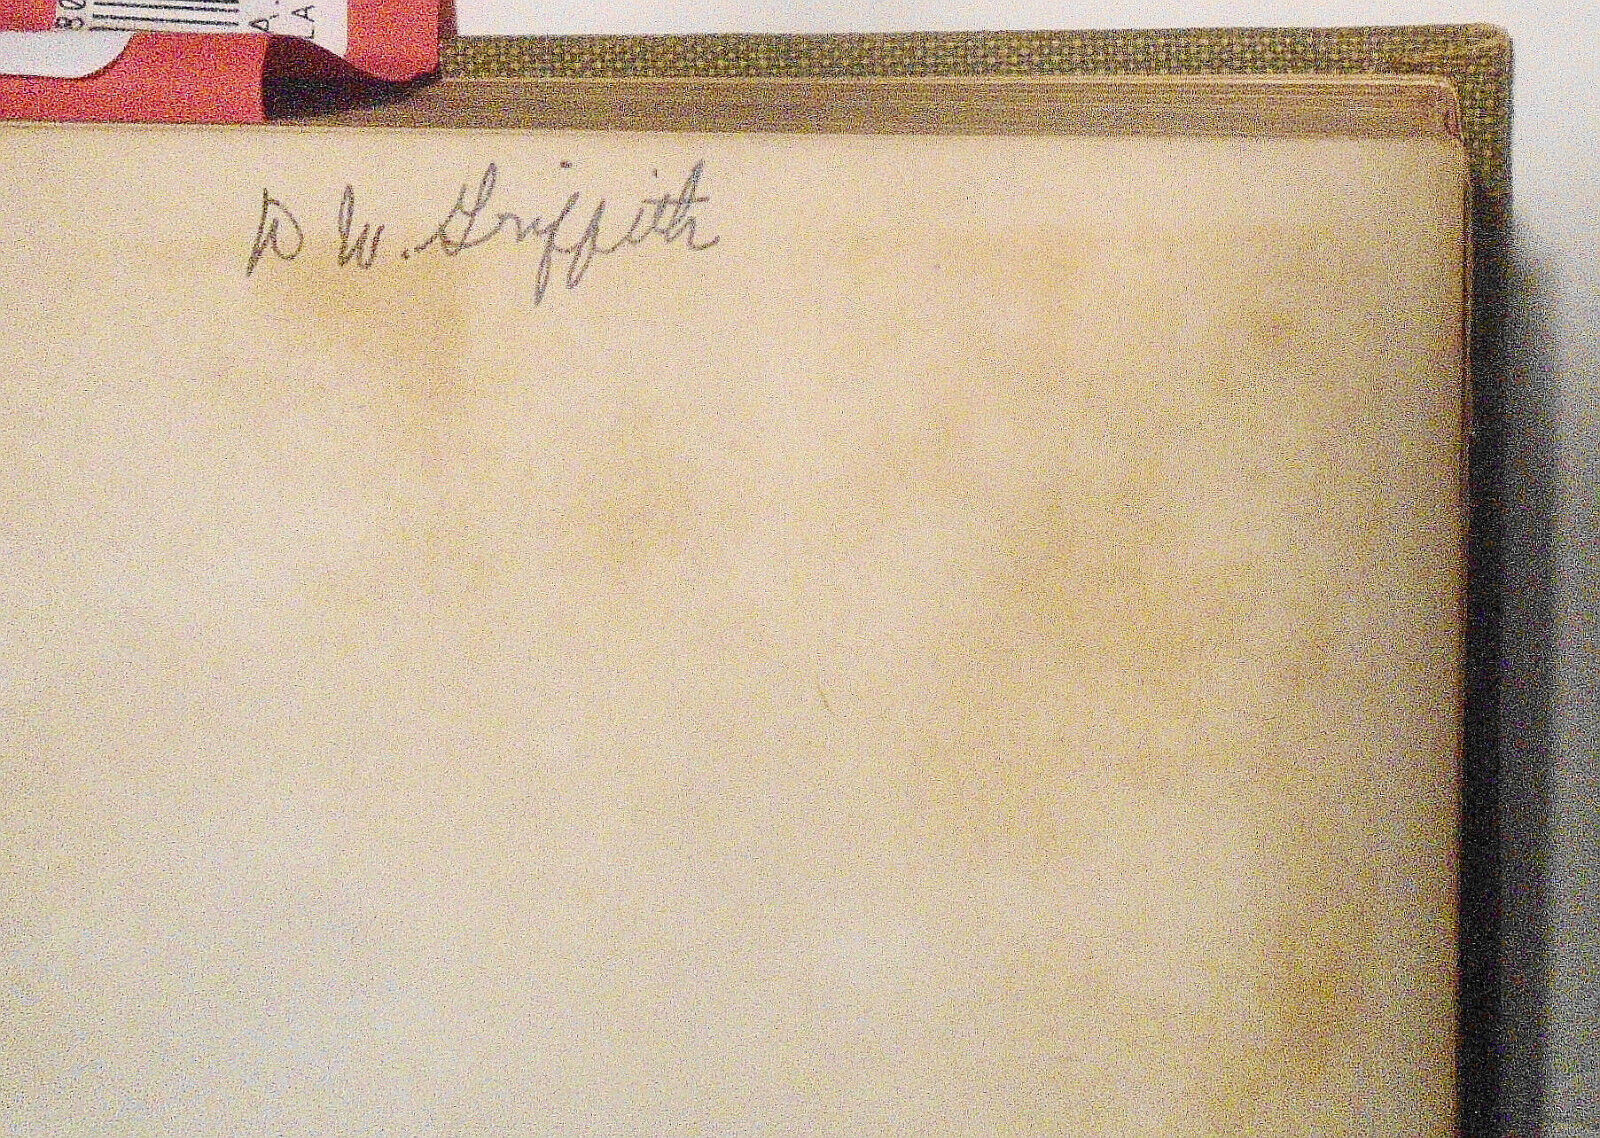 D. W. Griffith SIGNED book - Arachne & Story of My Life, by George Ebers